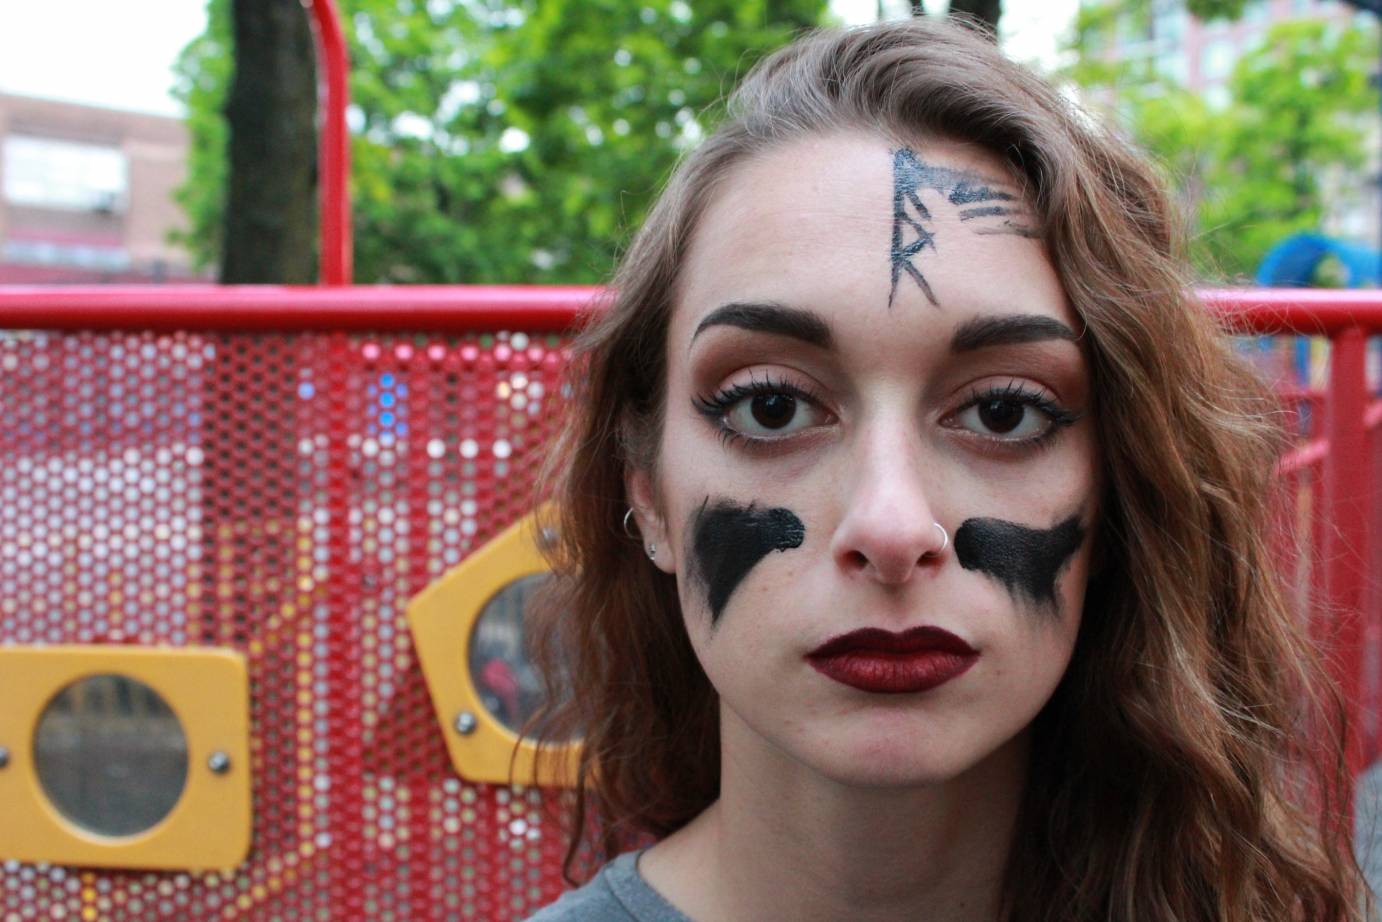 A girl with red lips and black streaks on her cheeks and forehead poses in front of a playground